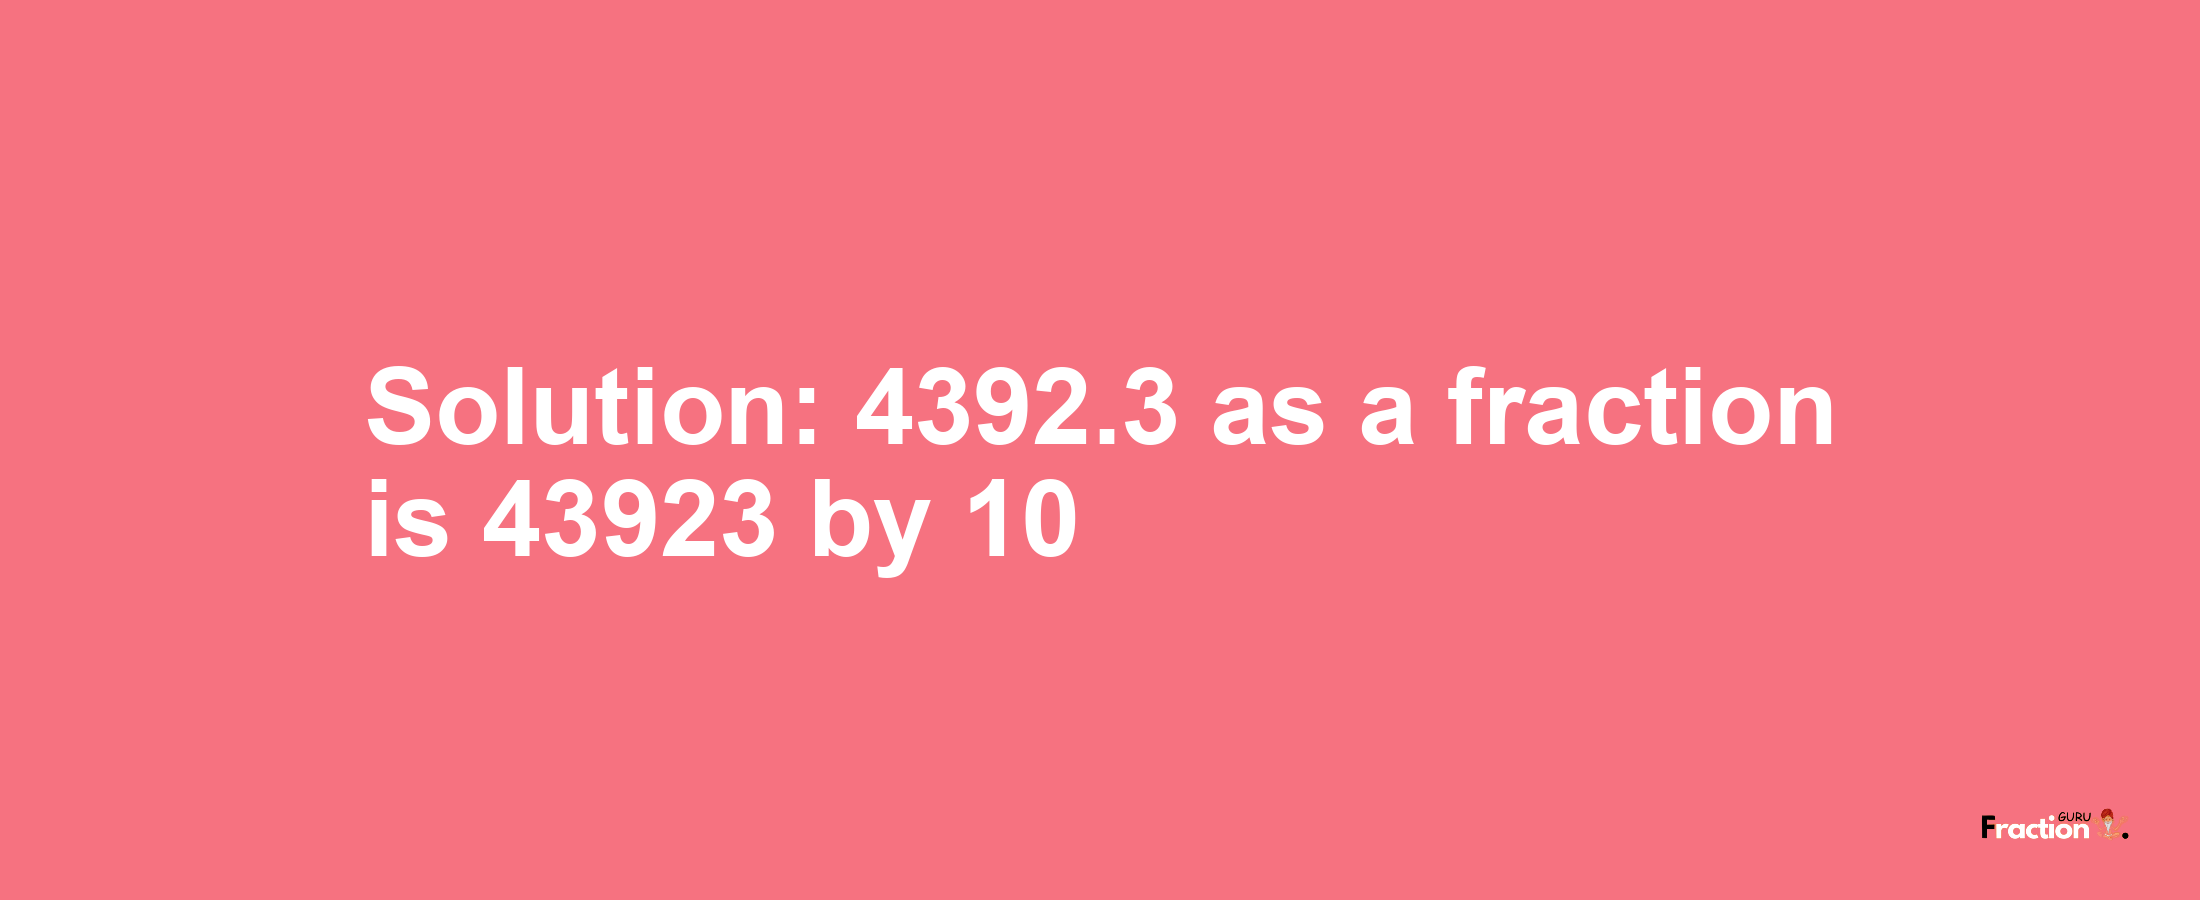 Solution:4392.3 as a fraction is 43923/10